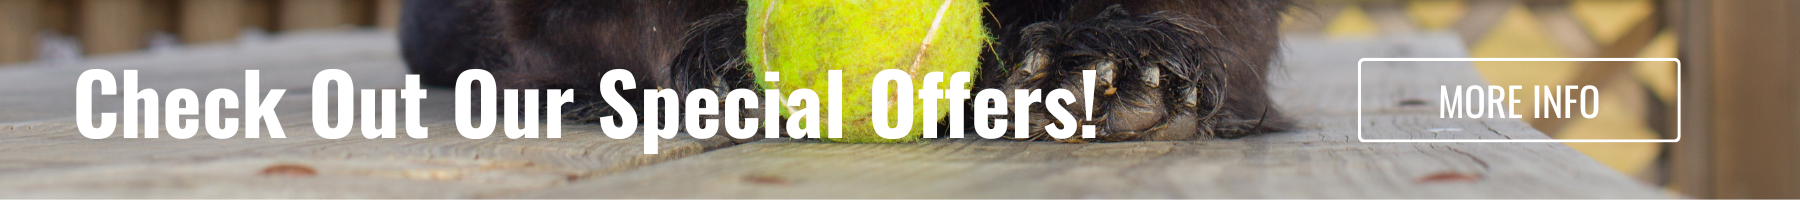 Special Offers banner